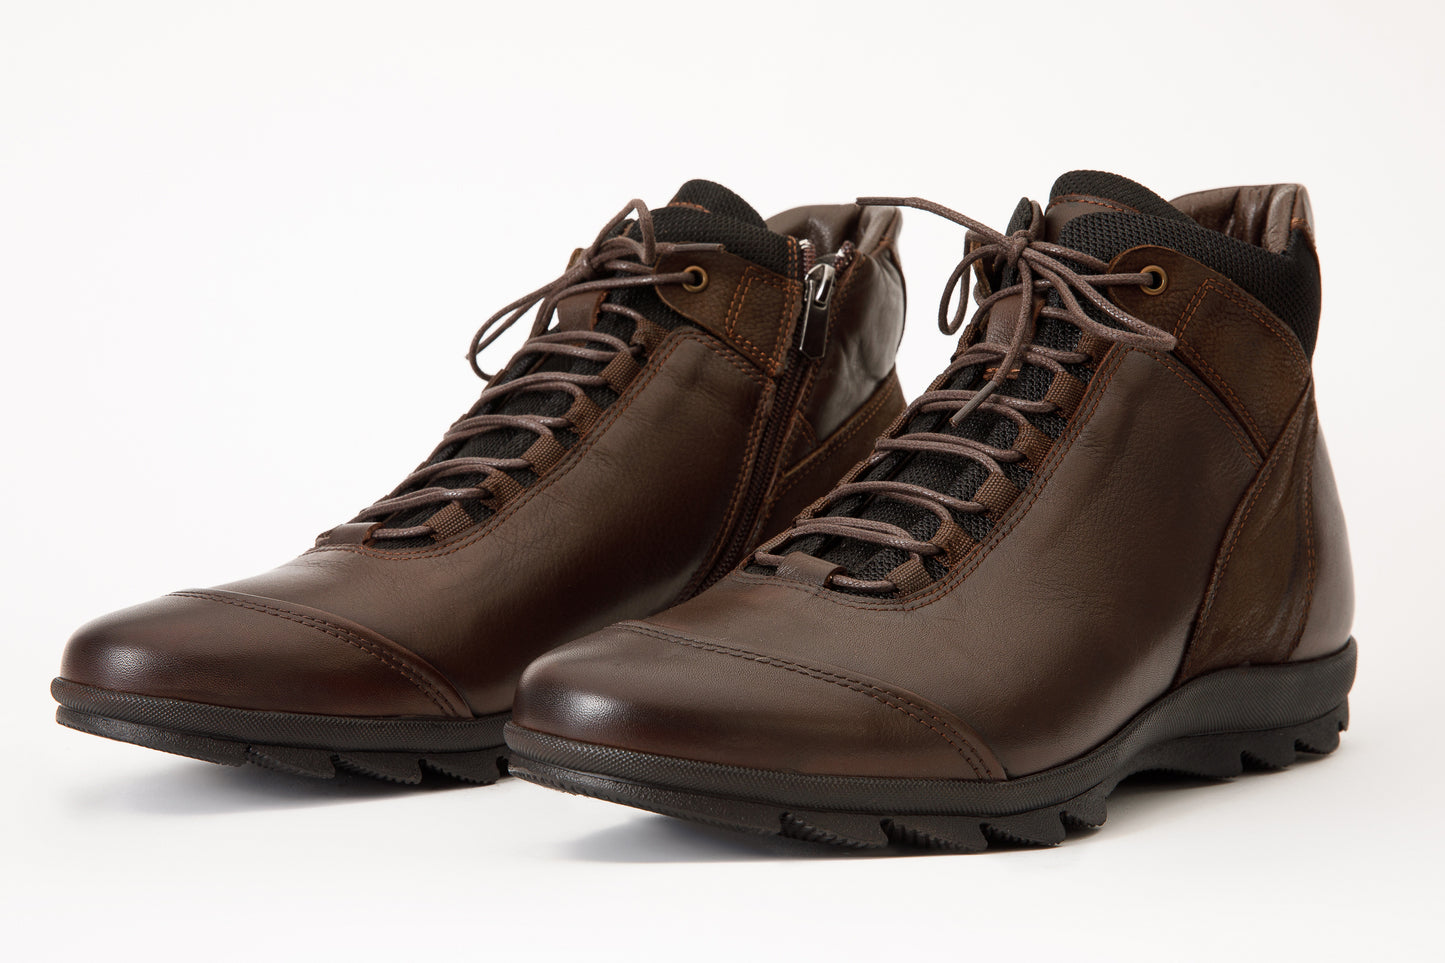 The Houston Leather Brown Lace-Up Casual Men Boot with a Zipper